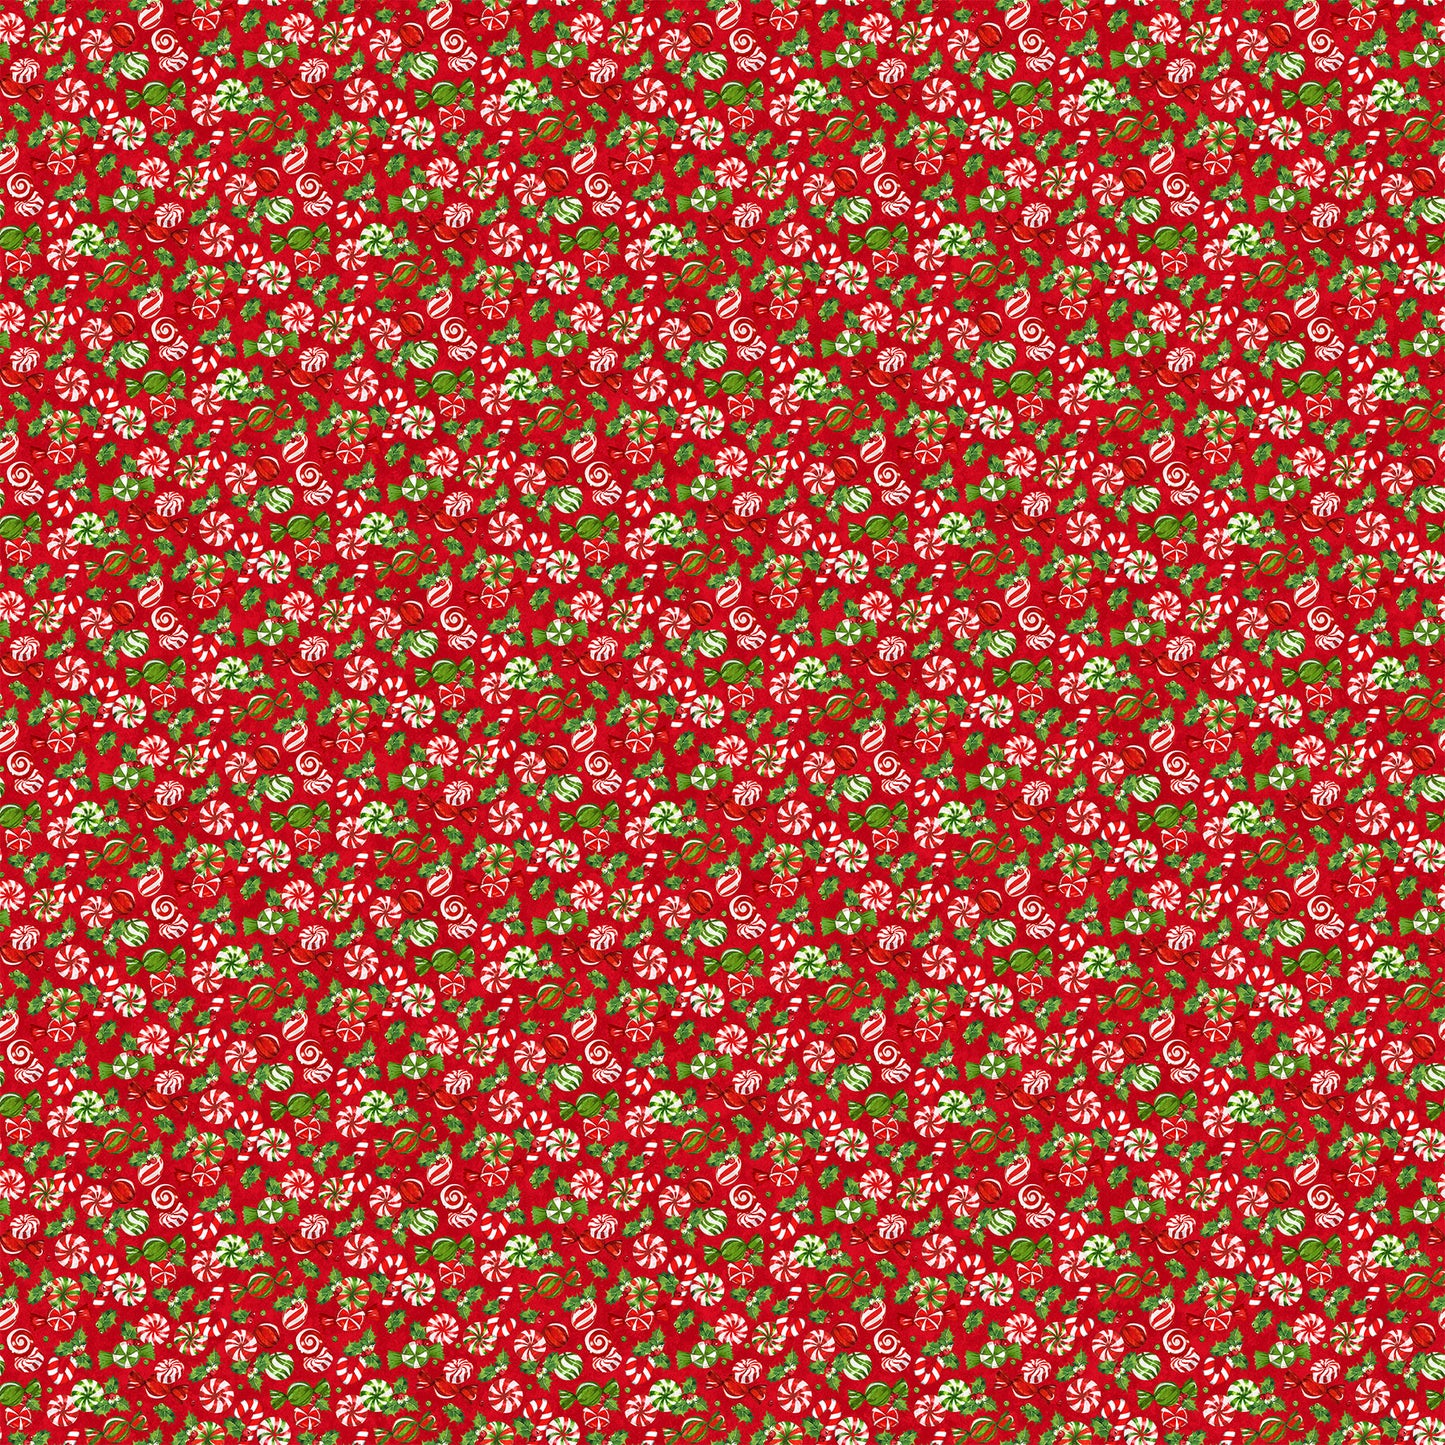 New Arrival: Sugar Coated Digital by Deborah Edwards Red/Multi DP27147-24 Cotton Woven Fabric